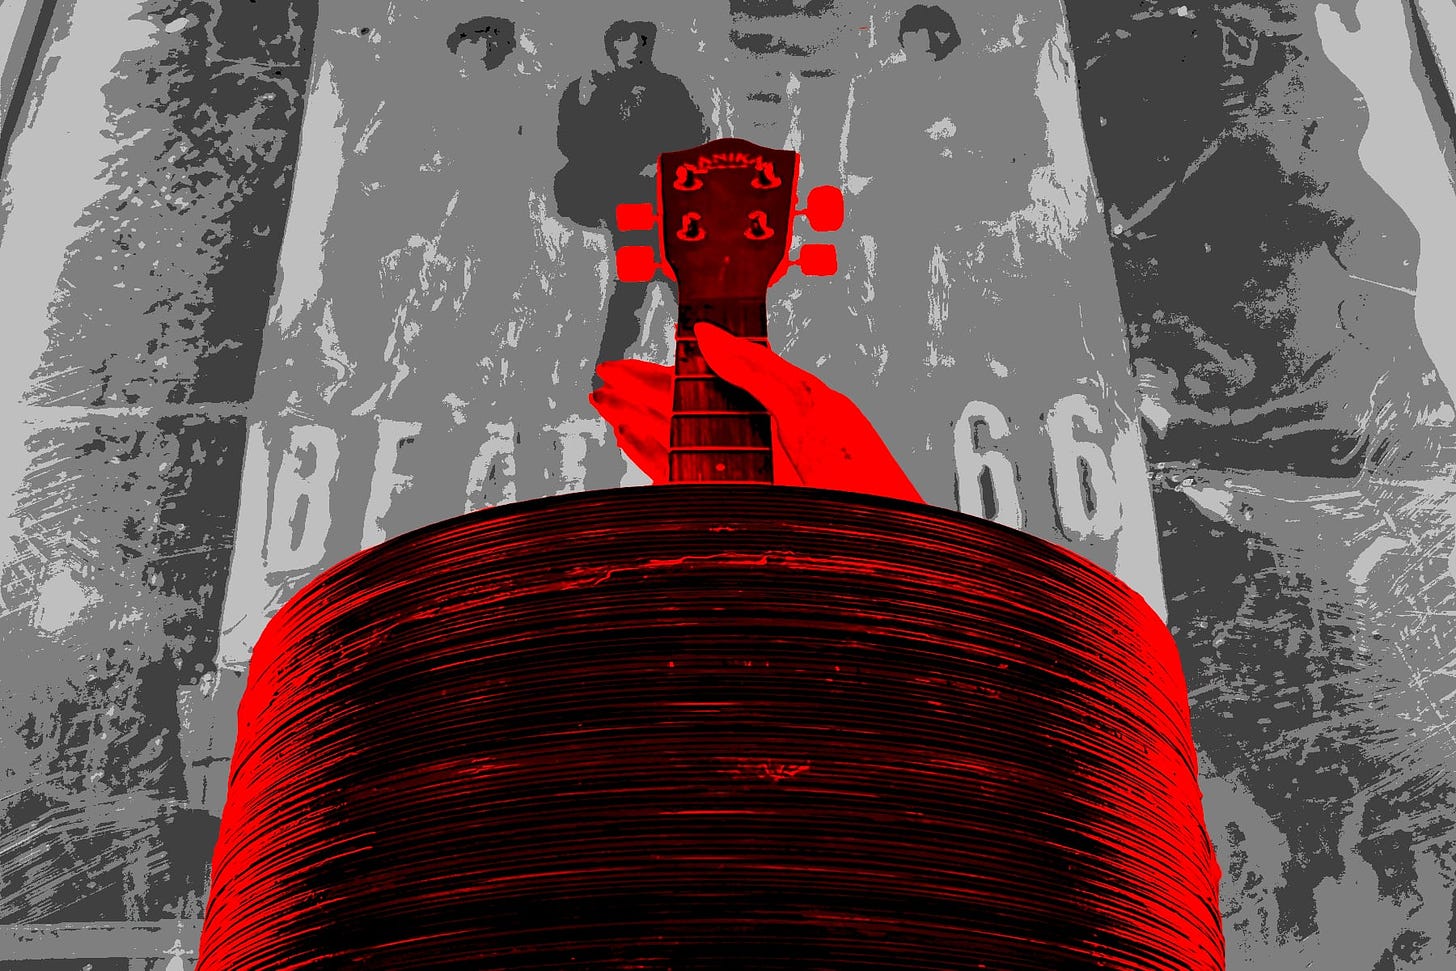 A digitally altered artwork that seems to form part of Martin Bell's "Collection" exhibition. The focal point is a towering stack of vinyl records, rendered in a deep red, which evokes a sense of musical history and passion. A mannequin's hand, strikingly pale against the vibrant stack, is placed at the top, reaching out as though in a gesture of creation or manipulation, holding the neck of a guitar. In the background, obscured and monochrome, is the iconic image of The Beatles, with the text "Beatles 66" referencing their active era. This suggests a connection to the revolutionary music of that time, and possibly a tribute to the enduring impact of The Beatles on music and culture. The overall effect is one of nostalgia, infused with a contemporary artistic edge, likely celebrating the timeless influence of music and its icons.